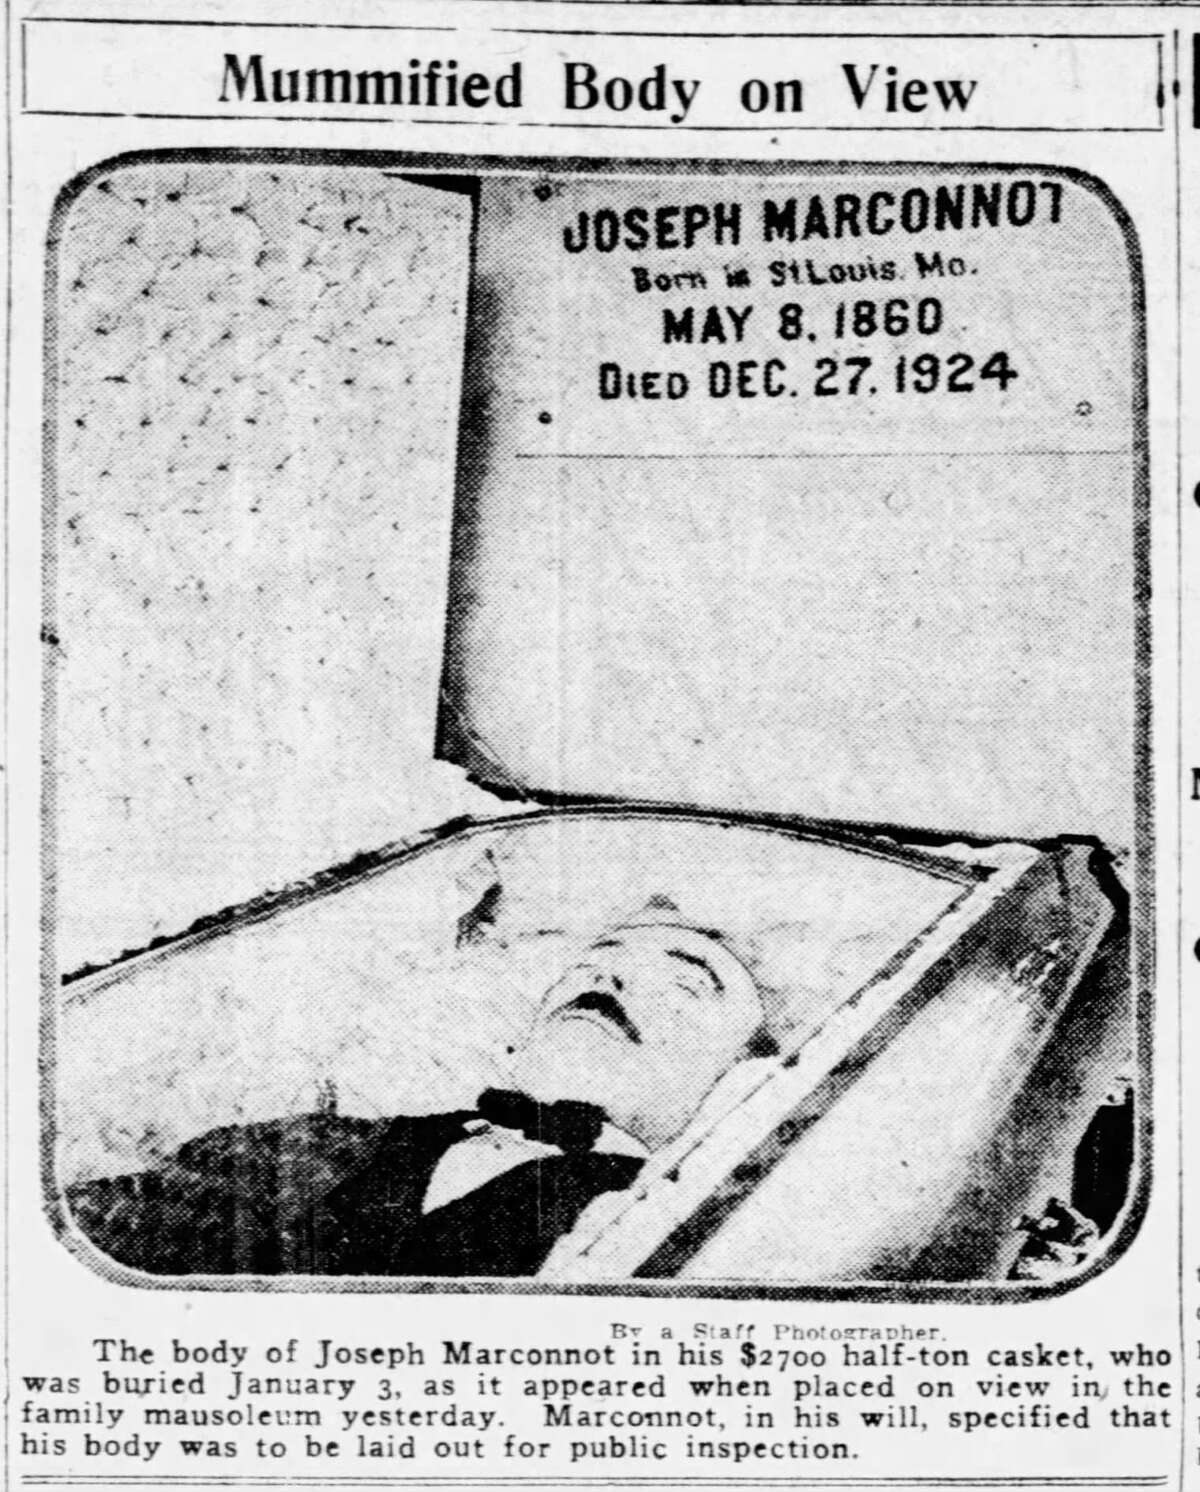 In this newspaper clipping from the St. Louis Post-Dispatch in 1924, Joseph Marconnot lies in state. He was mummified at death and was later put on display.